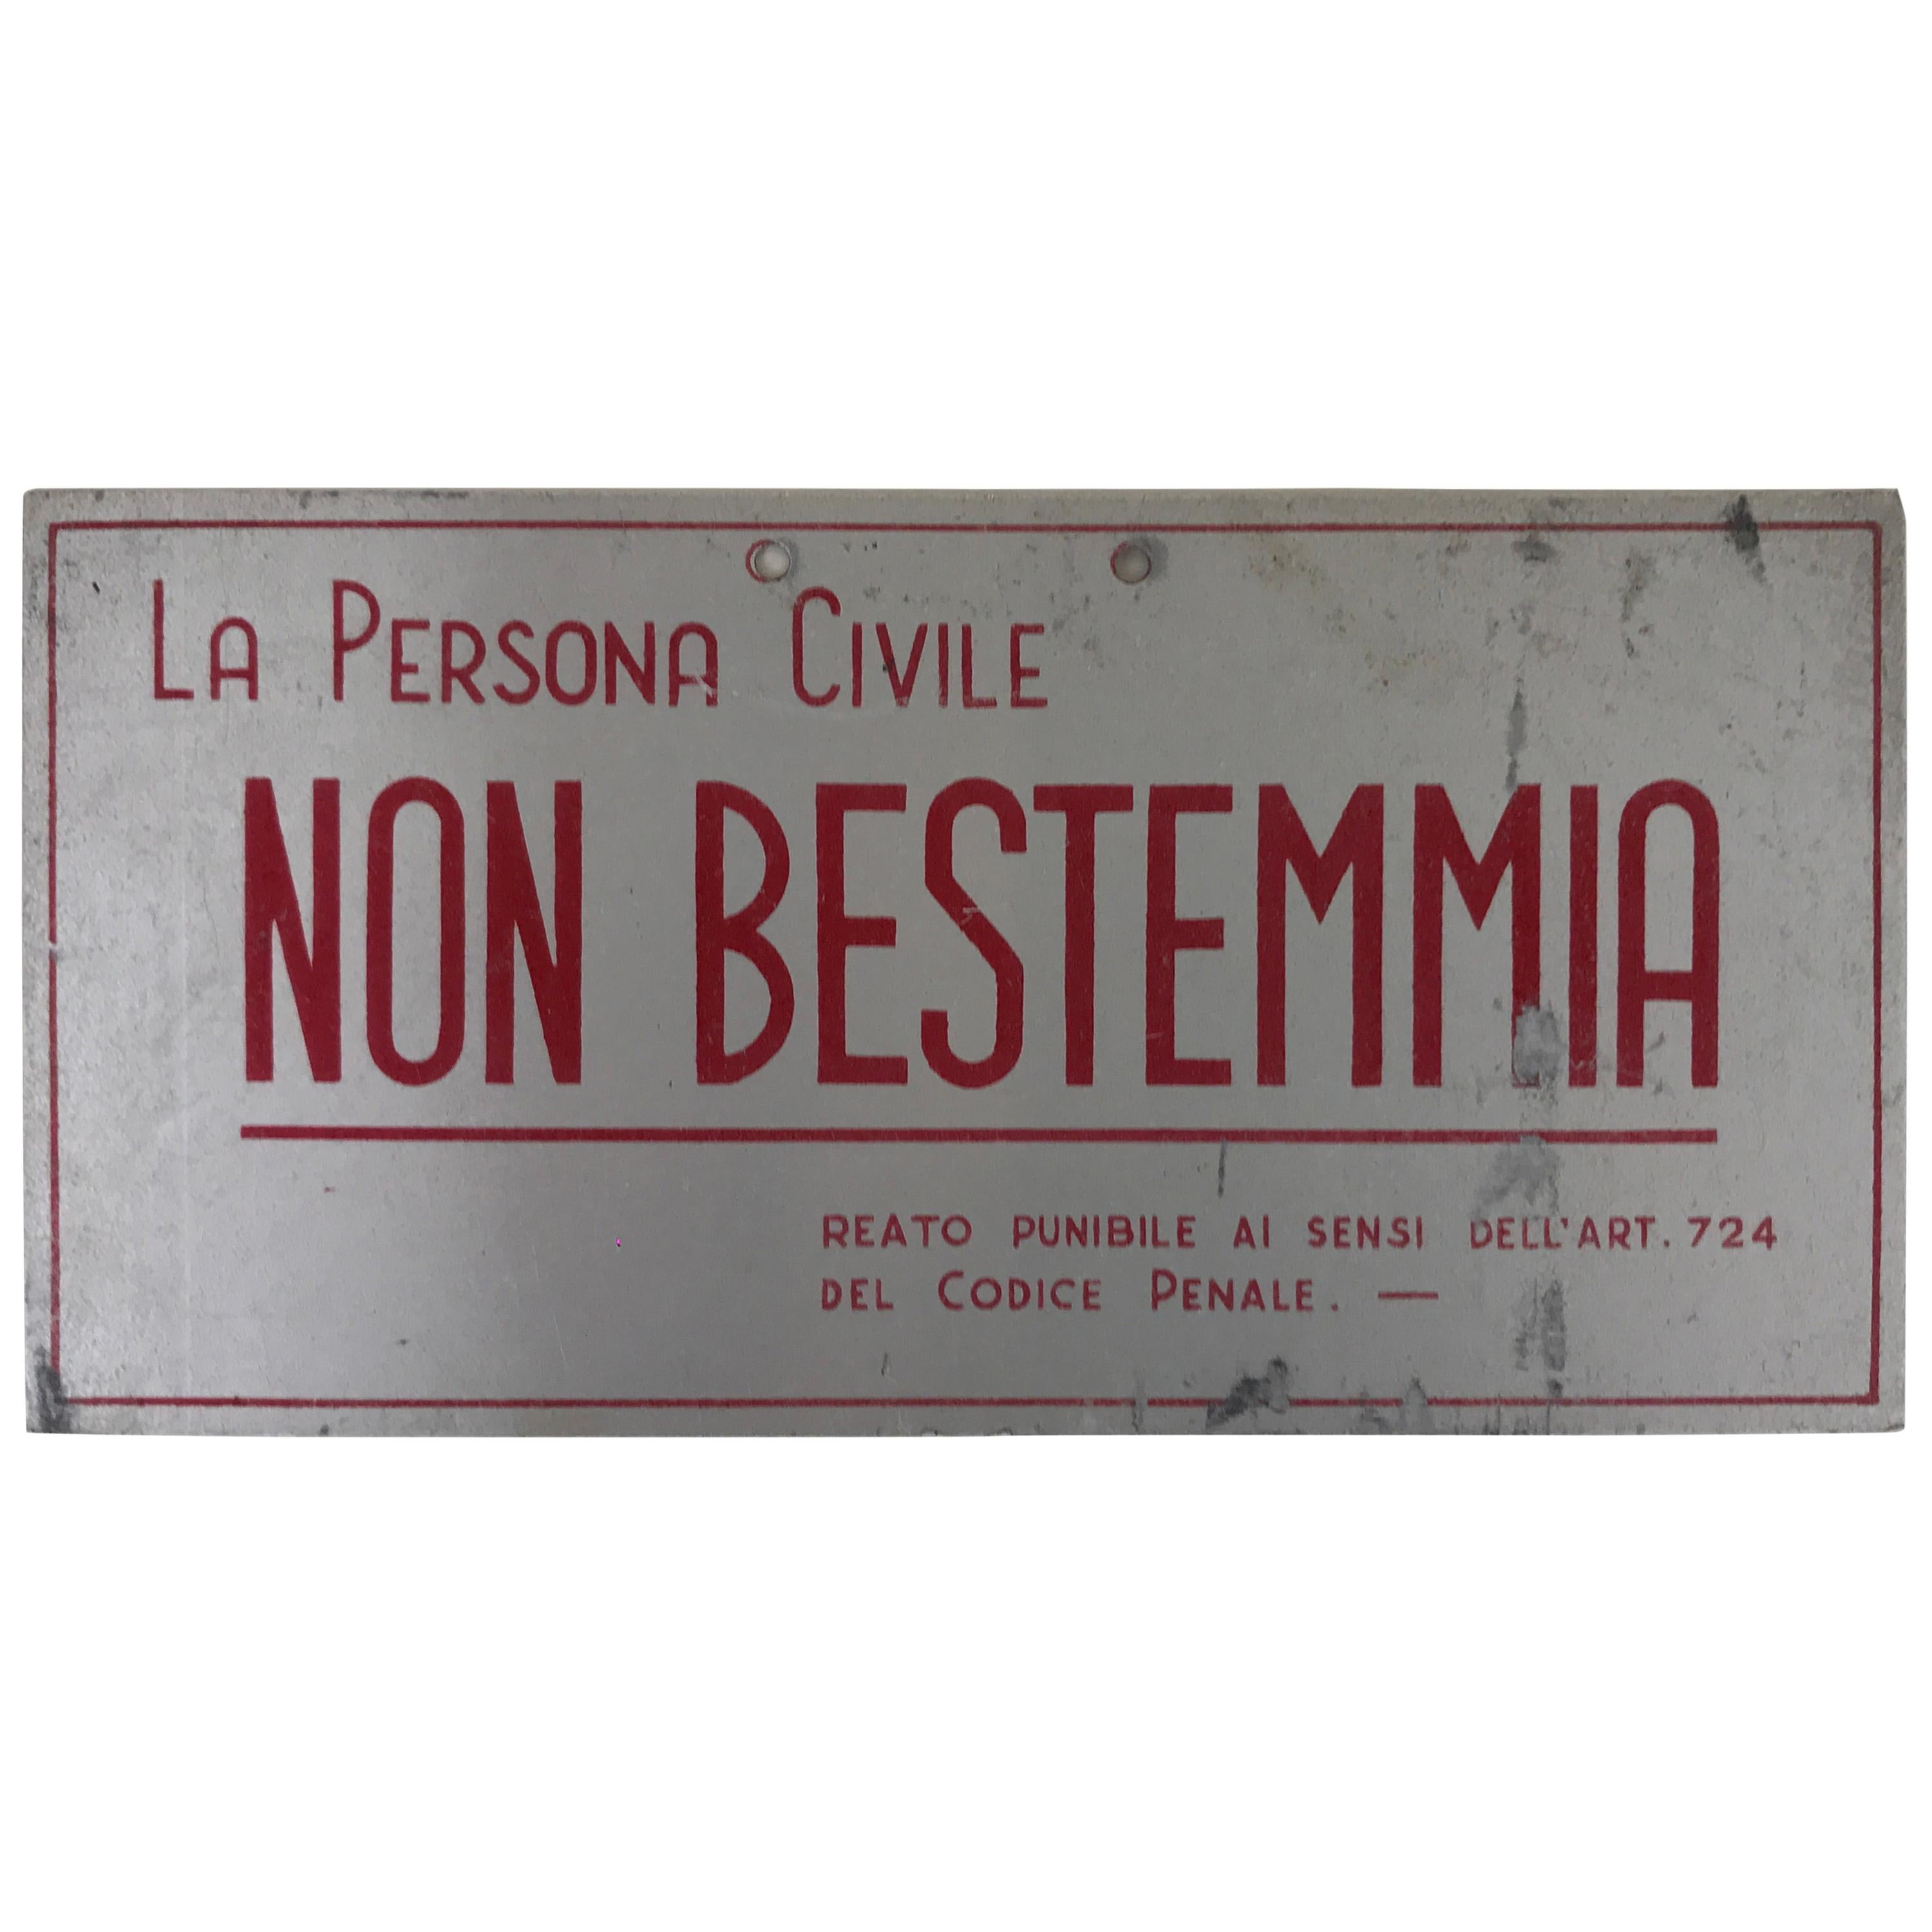 1940s Vintage Italian Screen-printed Tin Sign "The civil person doesn't swear"